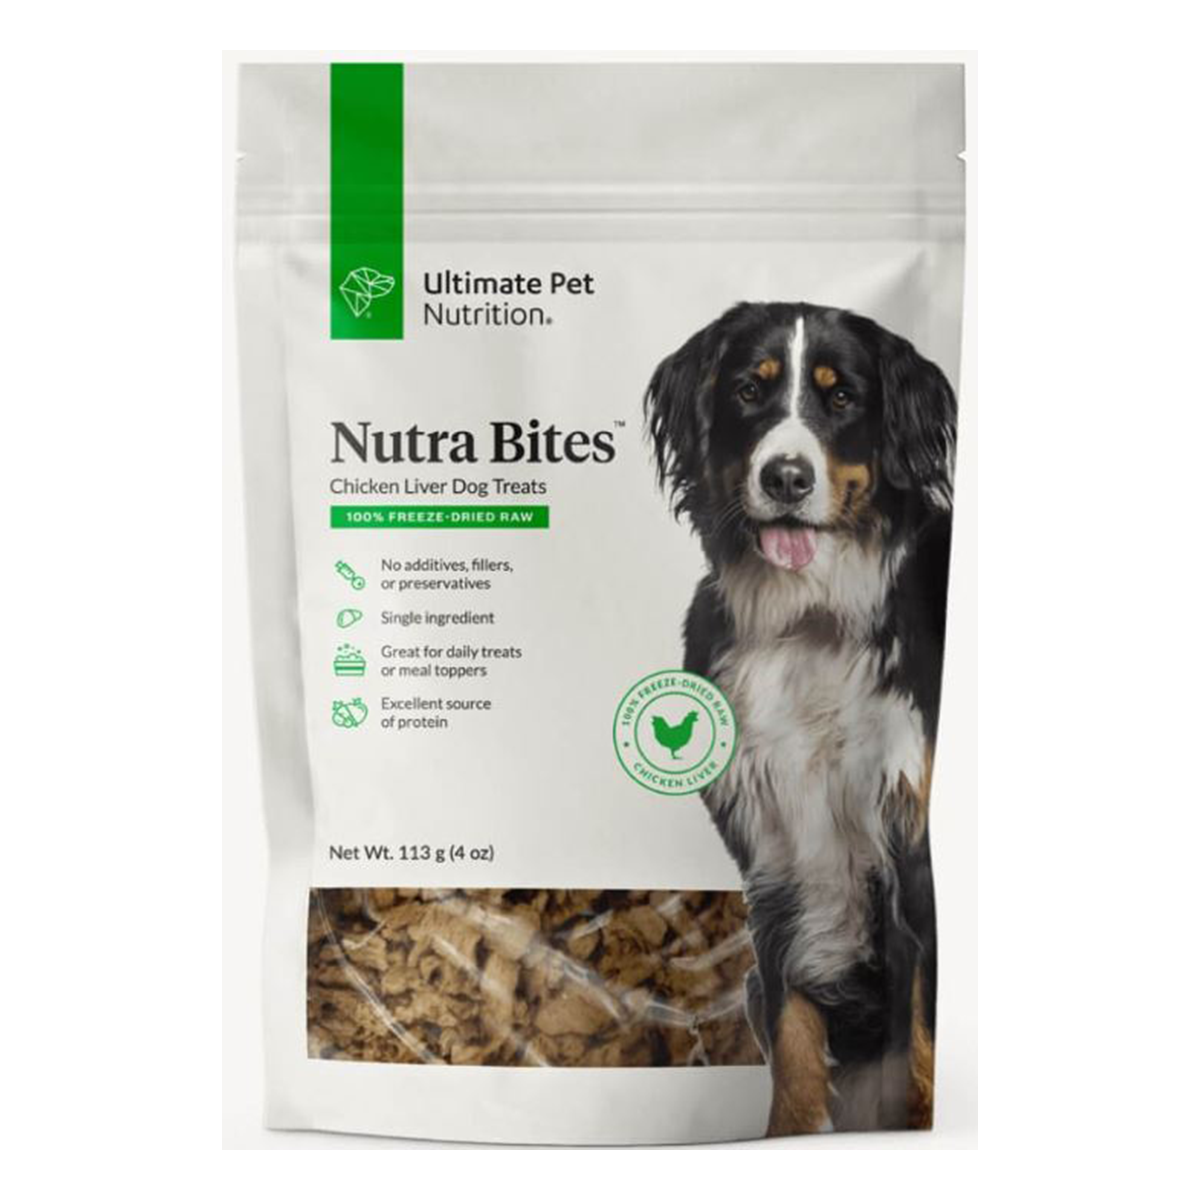 Ultimate Pet Nutrition Nutra Bites Freeze Dried Dog Treats - Chicken Liver